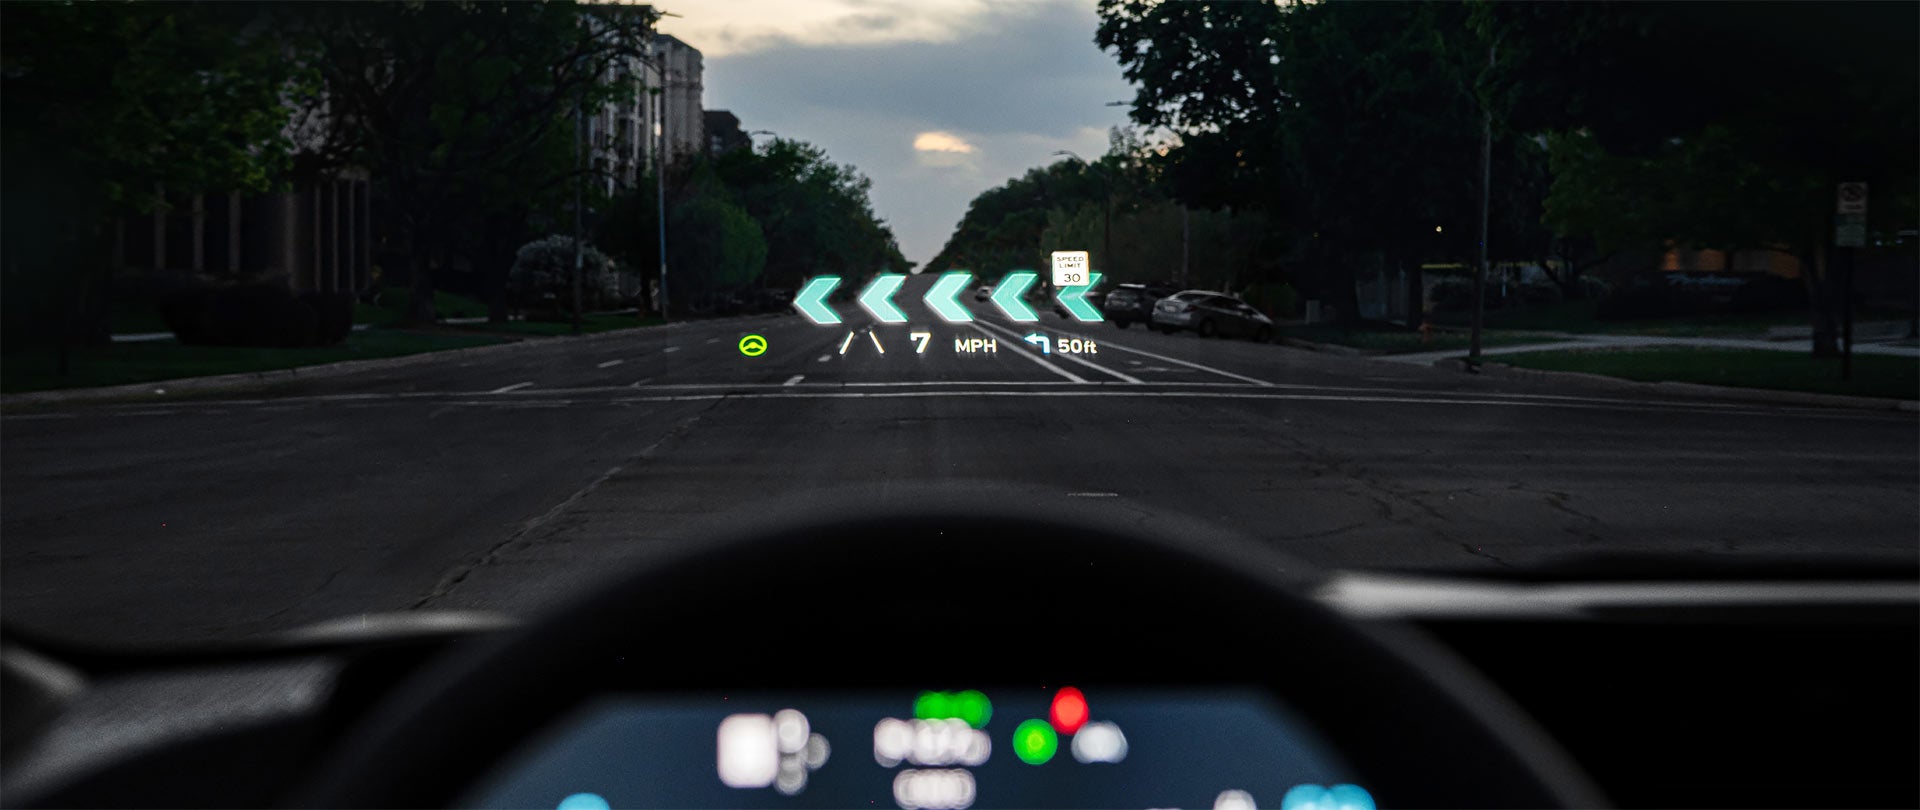 2022 Kia EV6 Augmented Reality Head-Up Display | Fort Collins Kia in Fort Collins CO